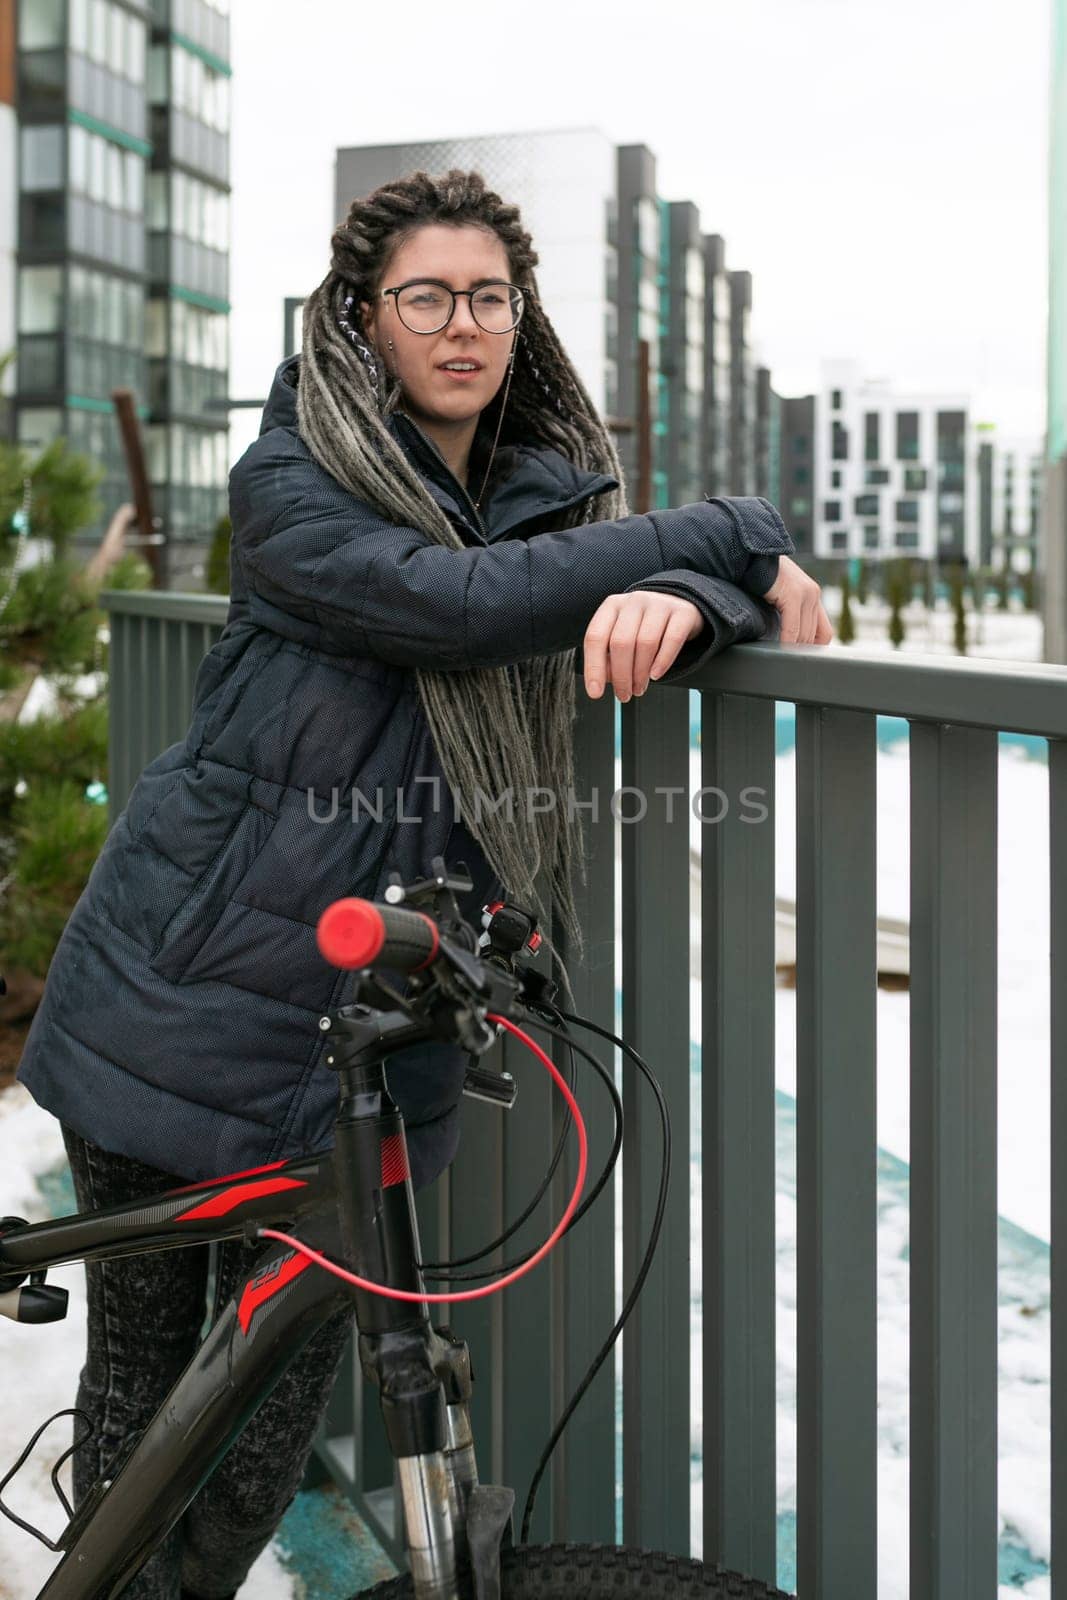 A pretty young woman with a dreadlocked hairstyle rides a rented bicycle by TRMK